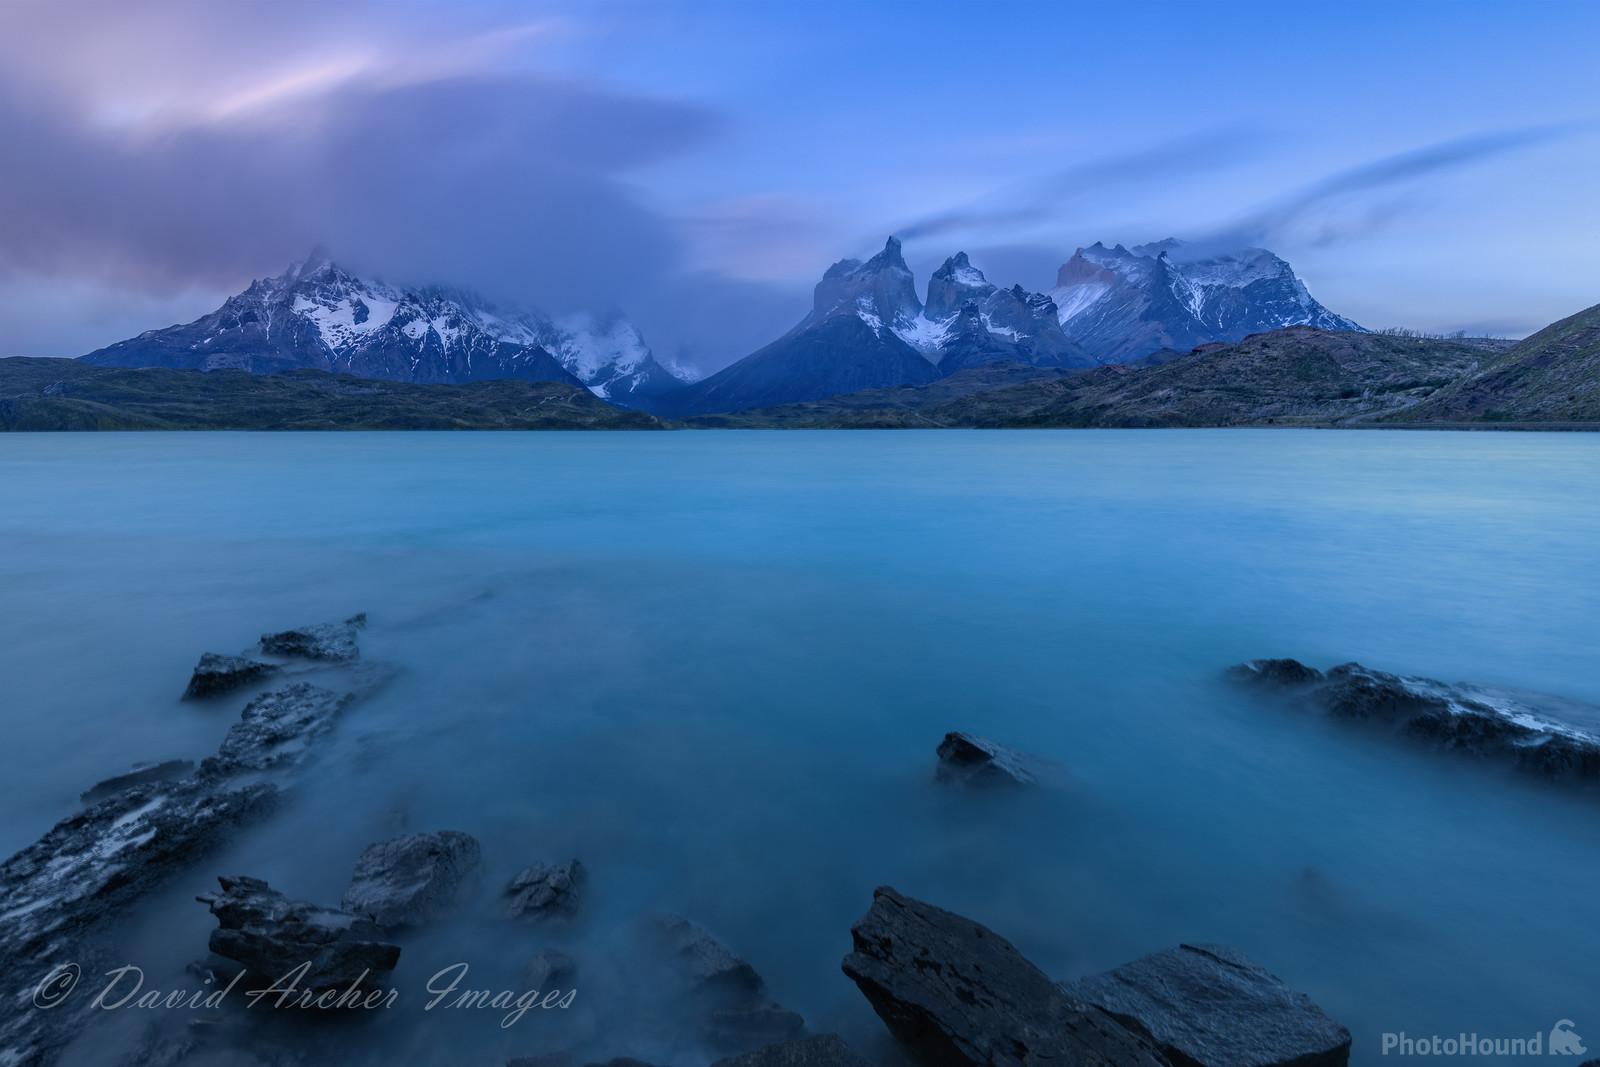 Image of Torres Del Paine, Hosterio Pehoe Island by David Archer